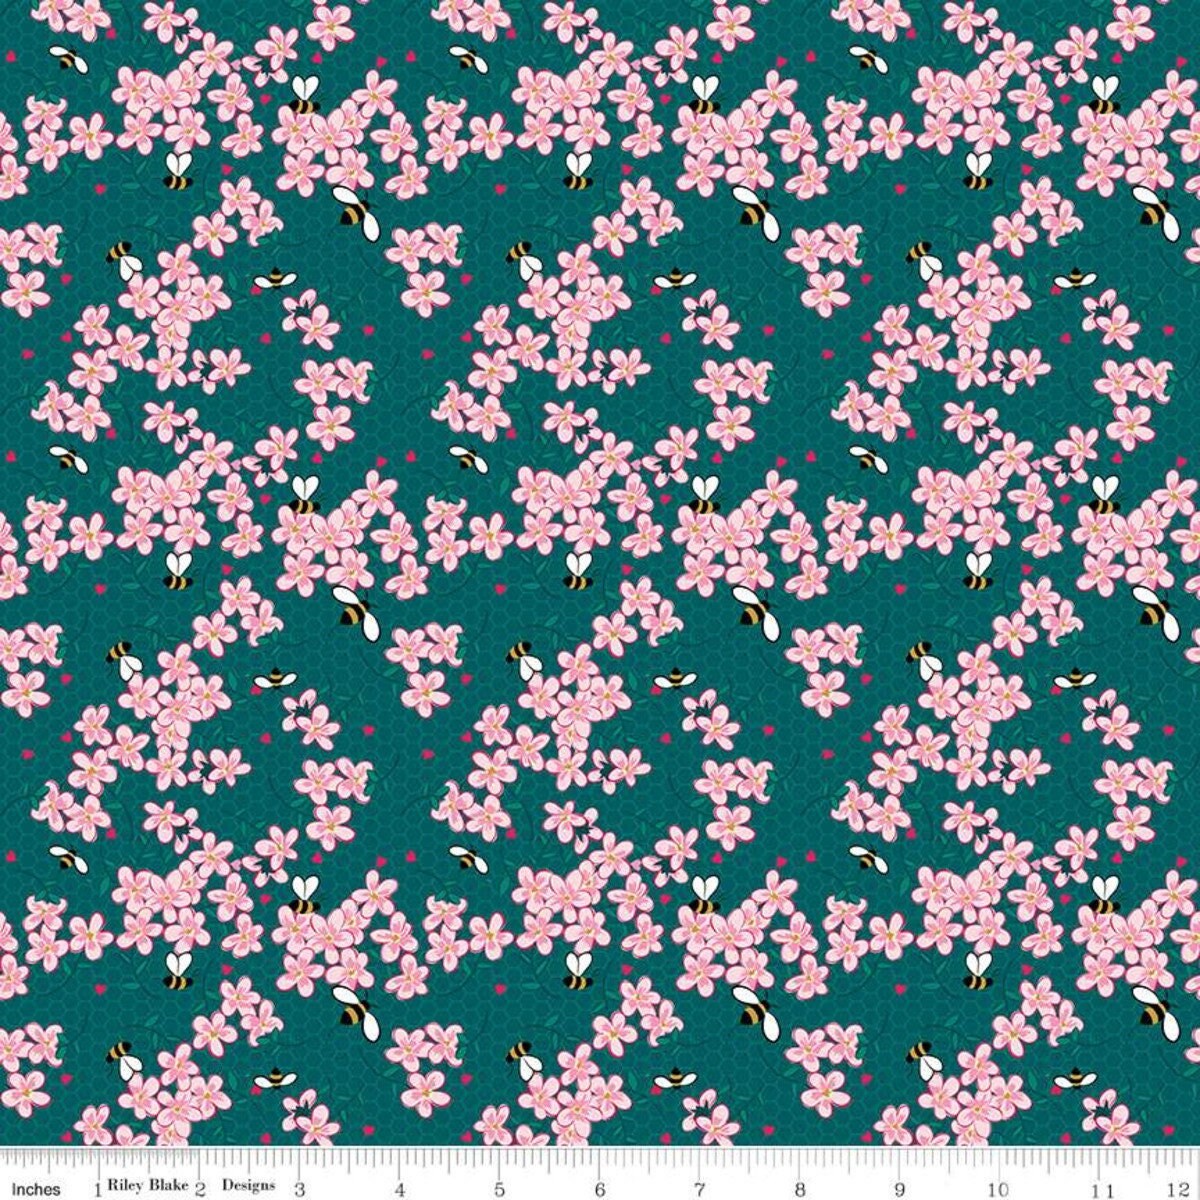 Mint For You Floral Teal - LAMINATED Cotton Fabric - Riley Blake